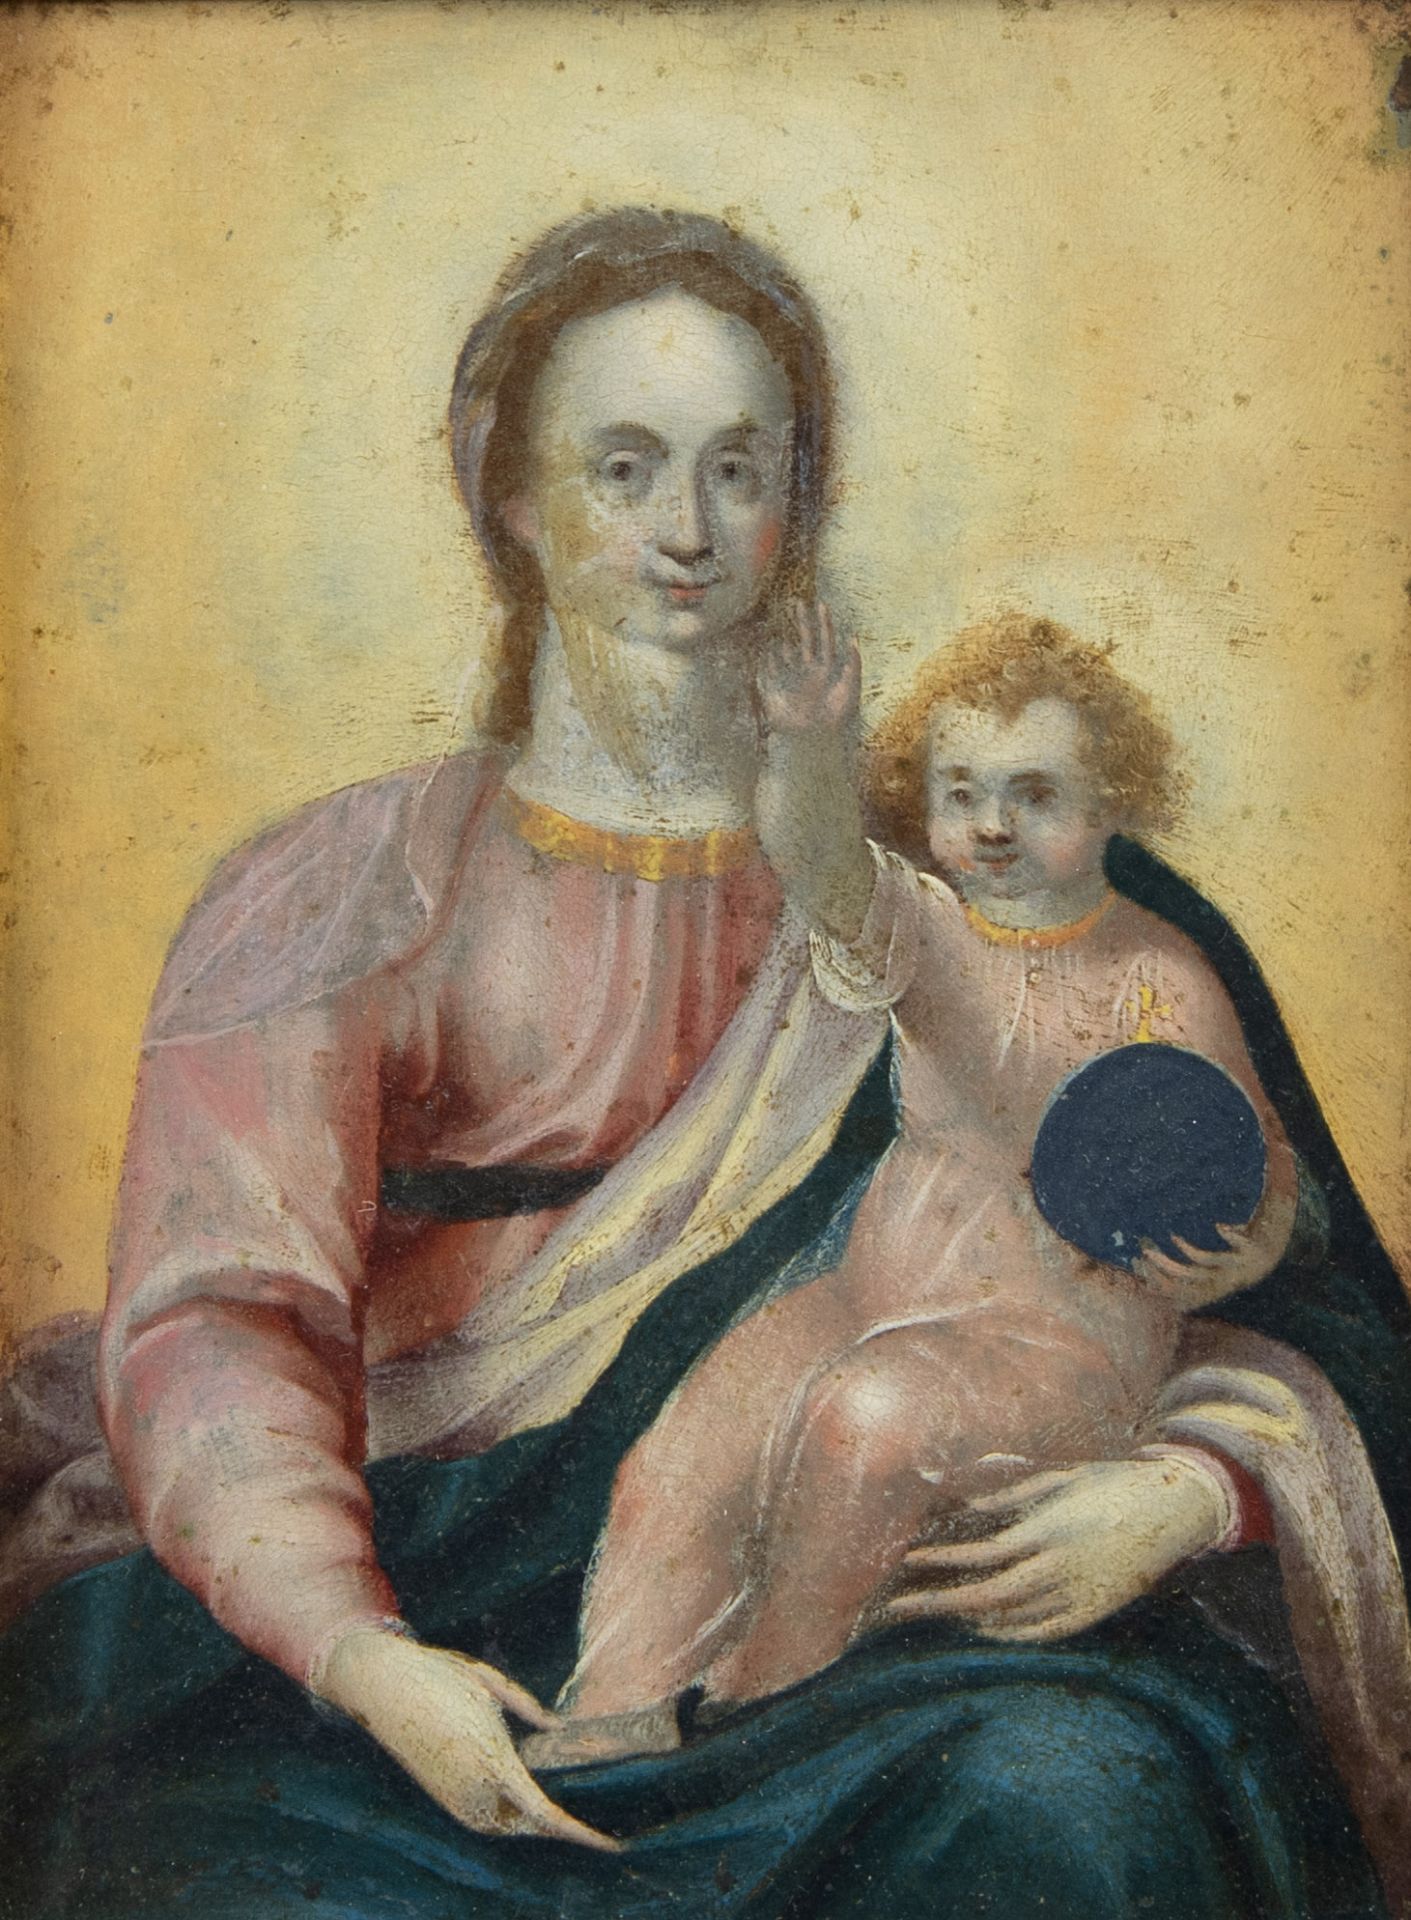 Oil on copper Madonna and Child, Southern European, 17th/18th century